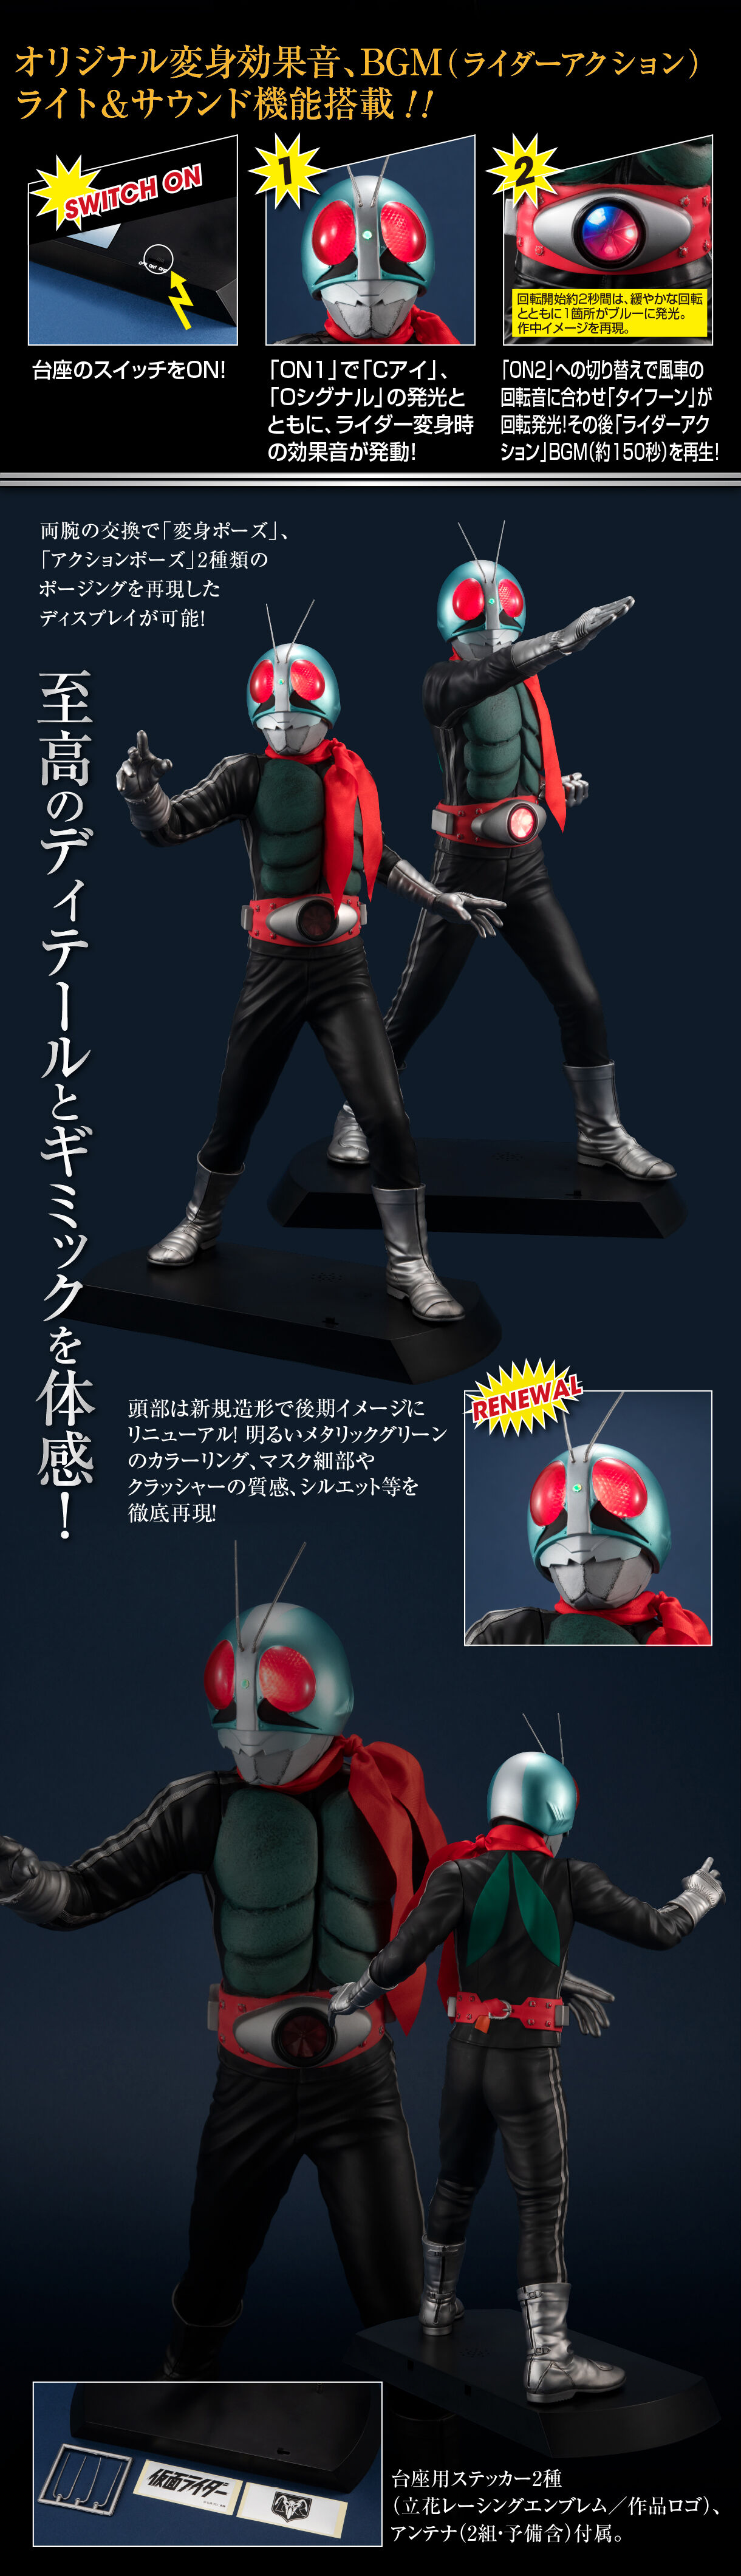 Ultimate Article 仮面ライダー新1号 （50th Anniversary Edition 